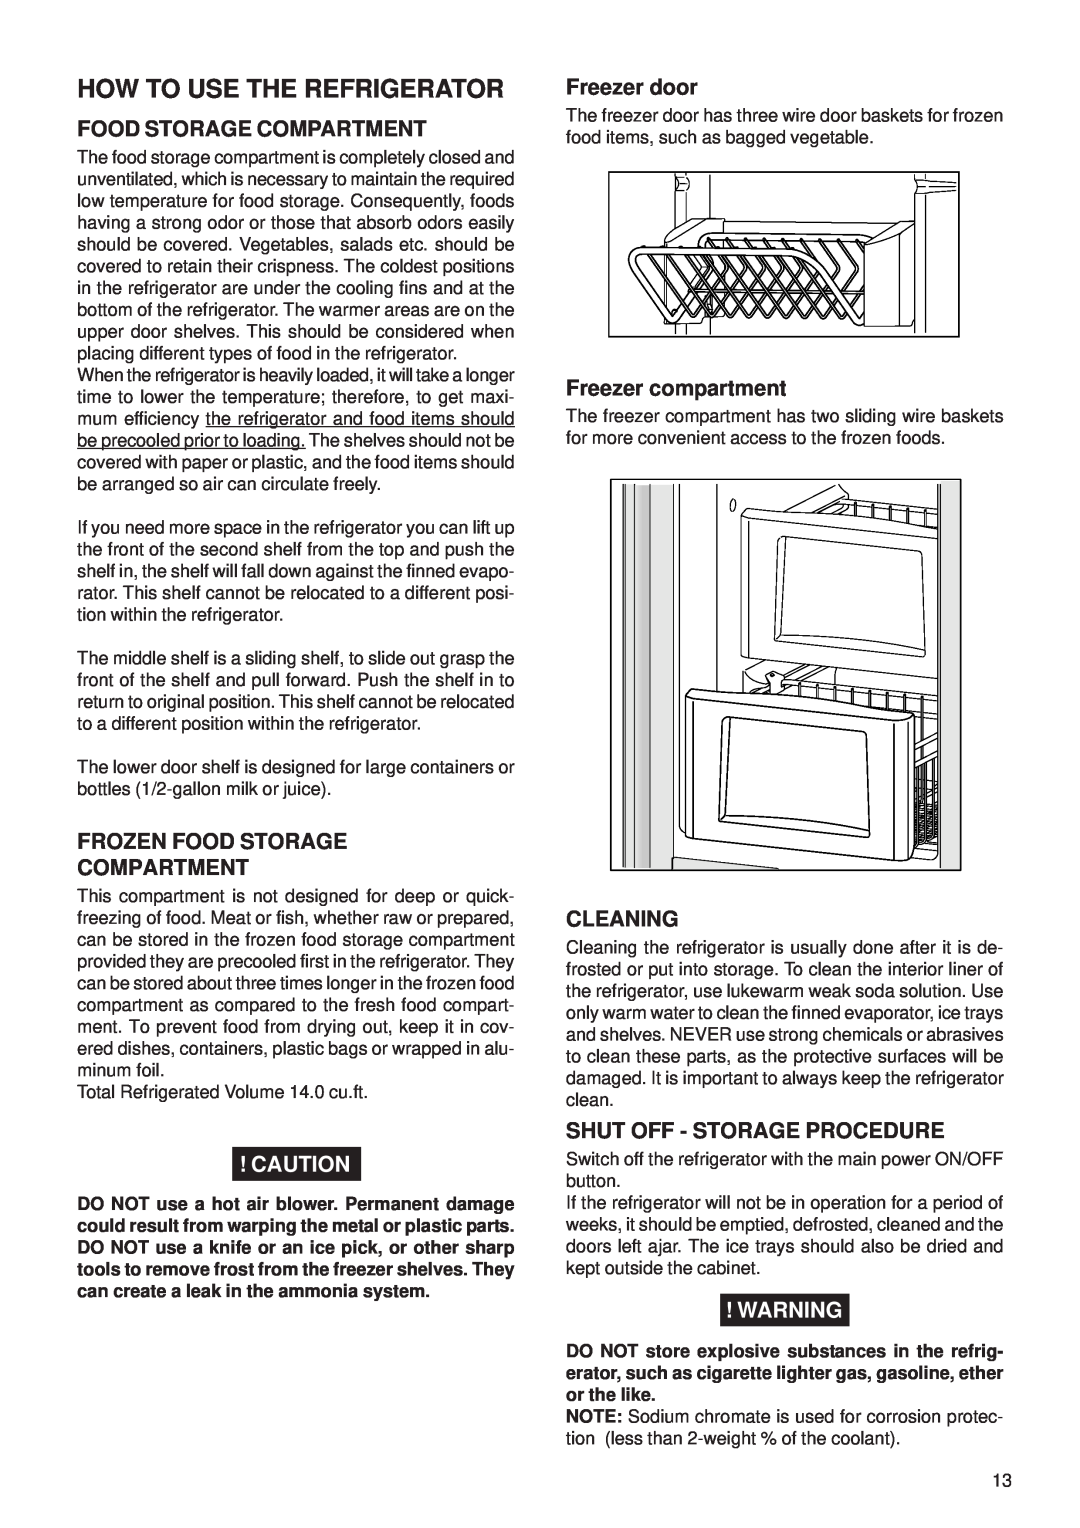 Dometic NDA1402 manual How To Use The Refrigerator, Frozen Food Storage Compartment, Freezer door, Freezer compartment 